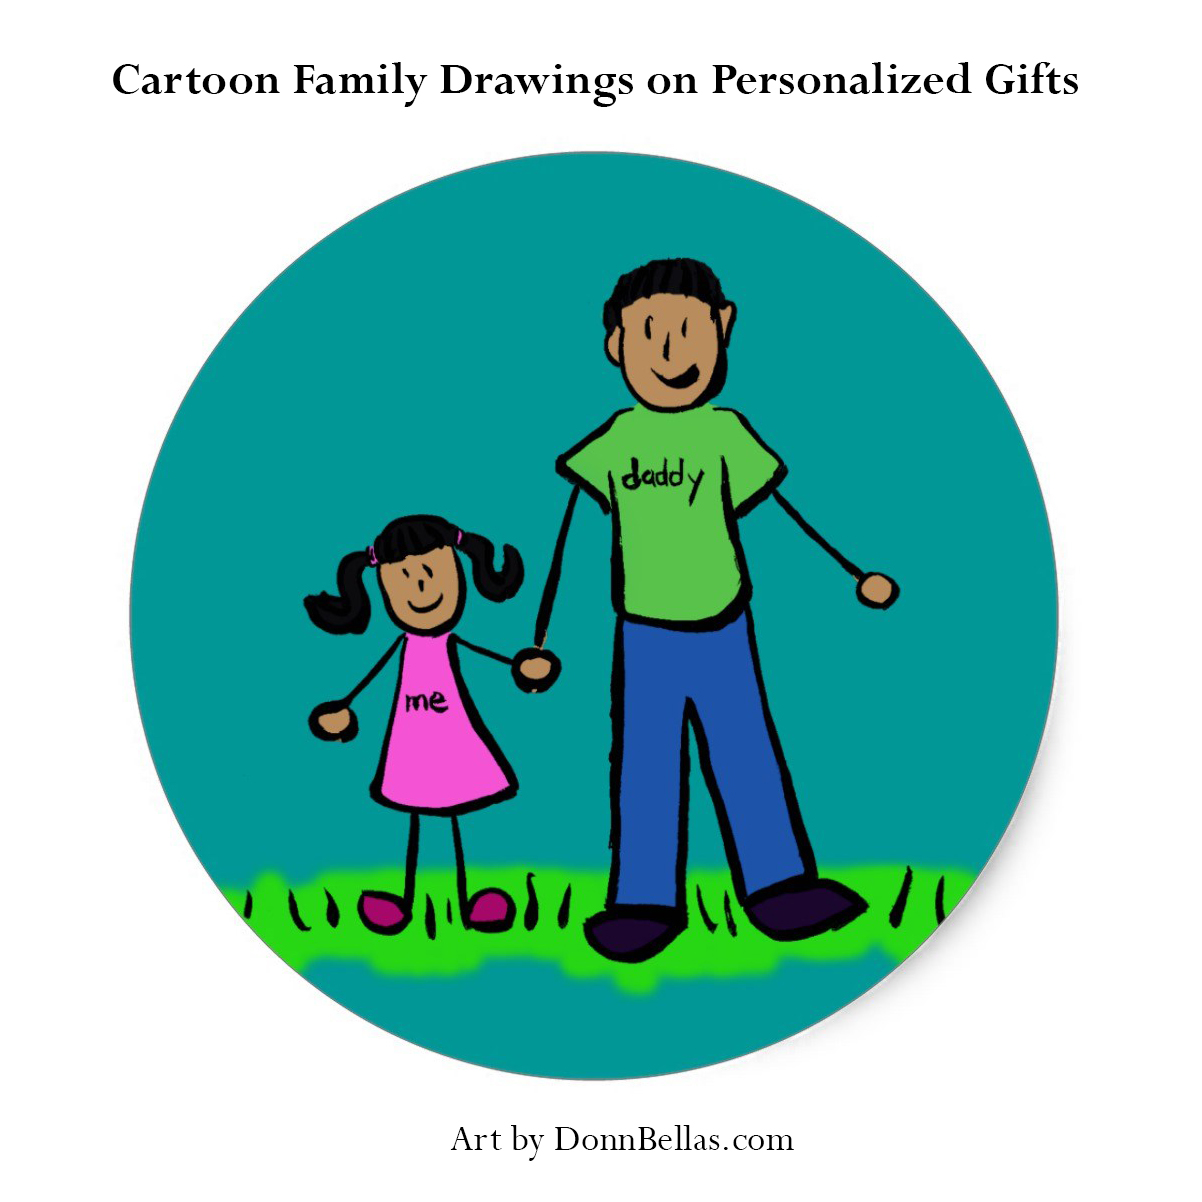 Cartoon family drawings for personalized gifts - DonnaBellas Art